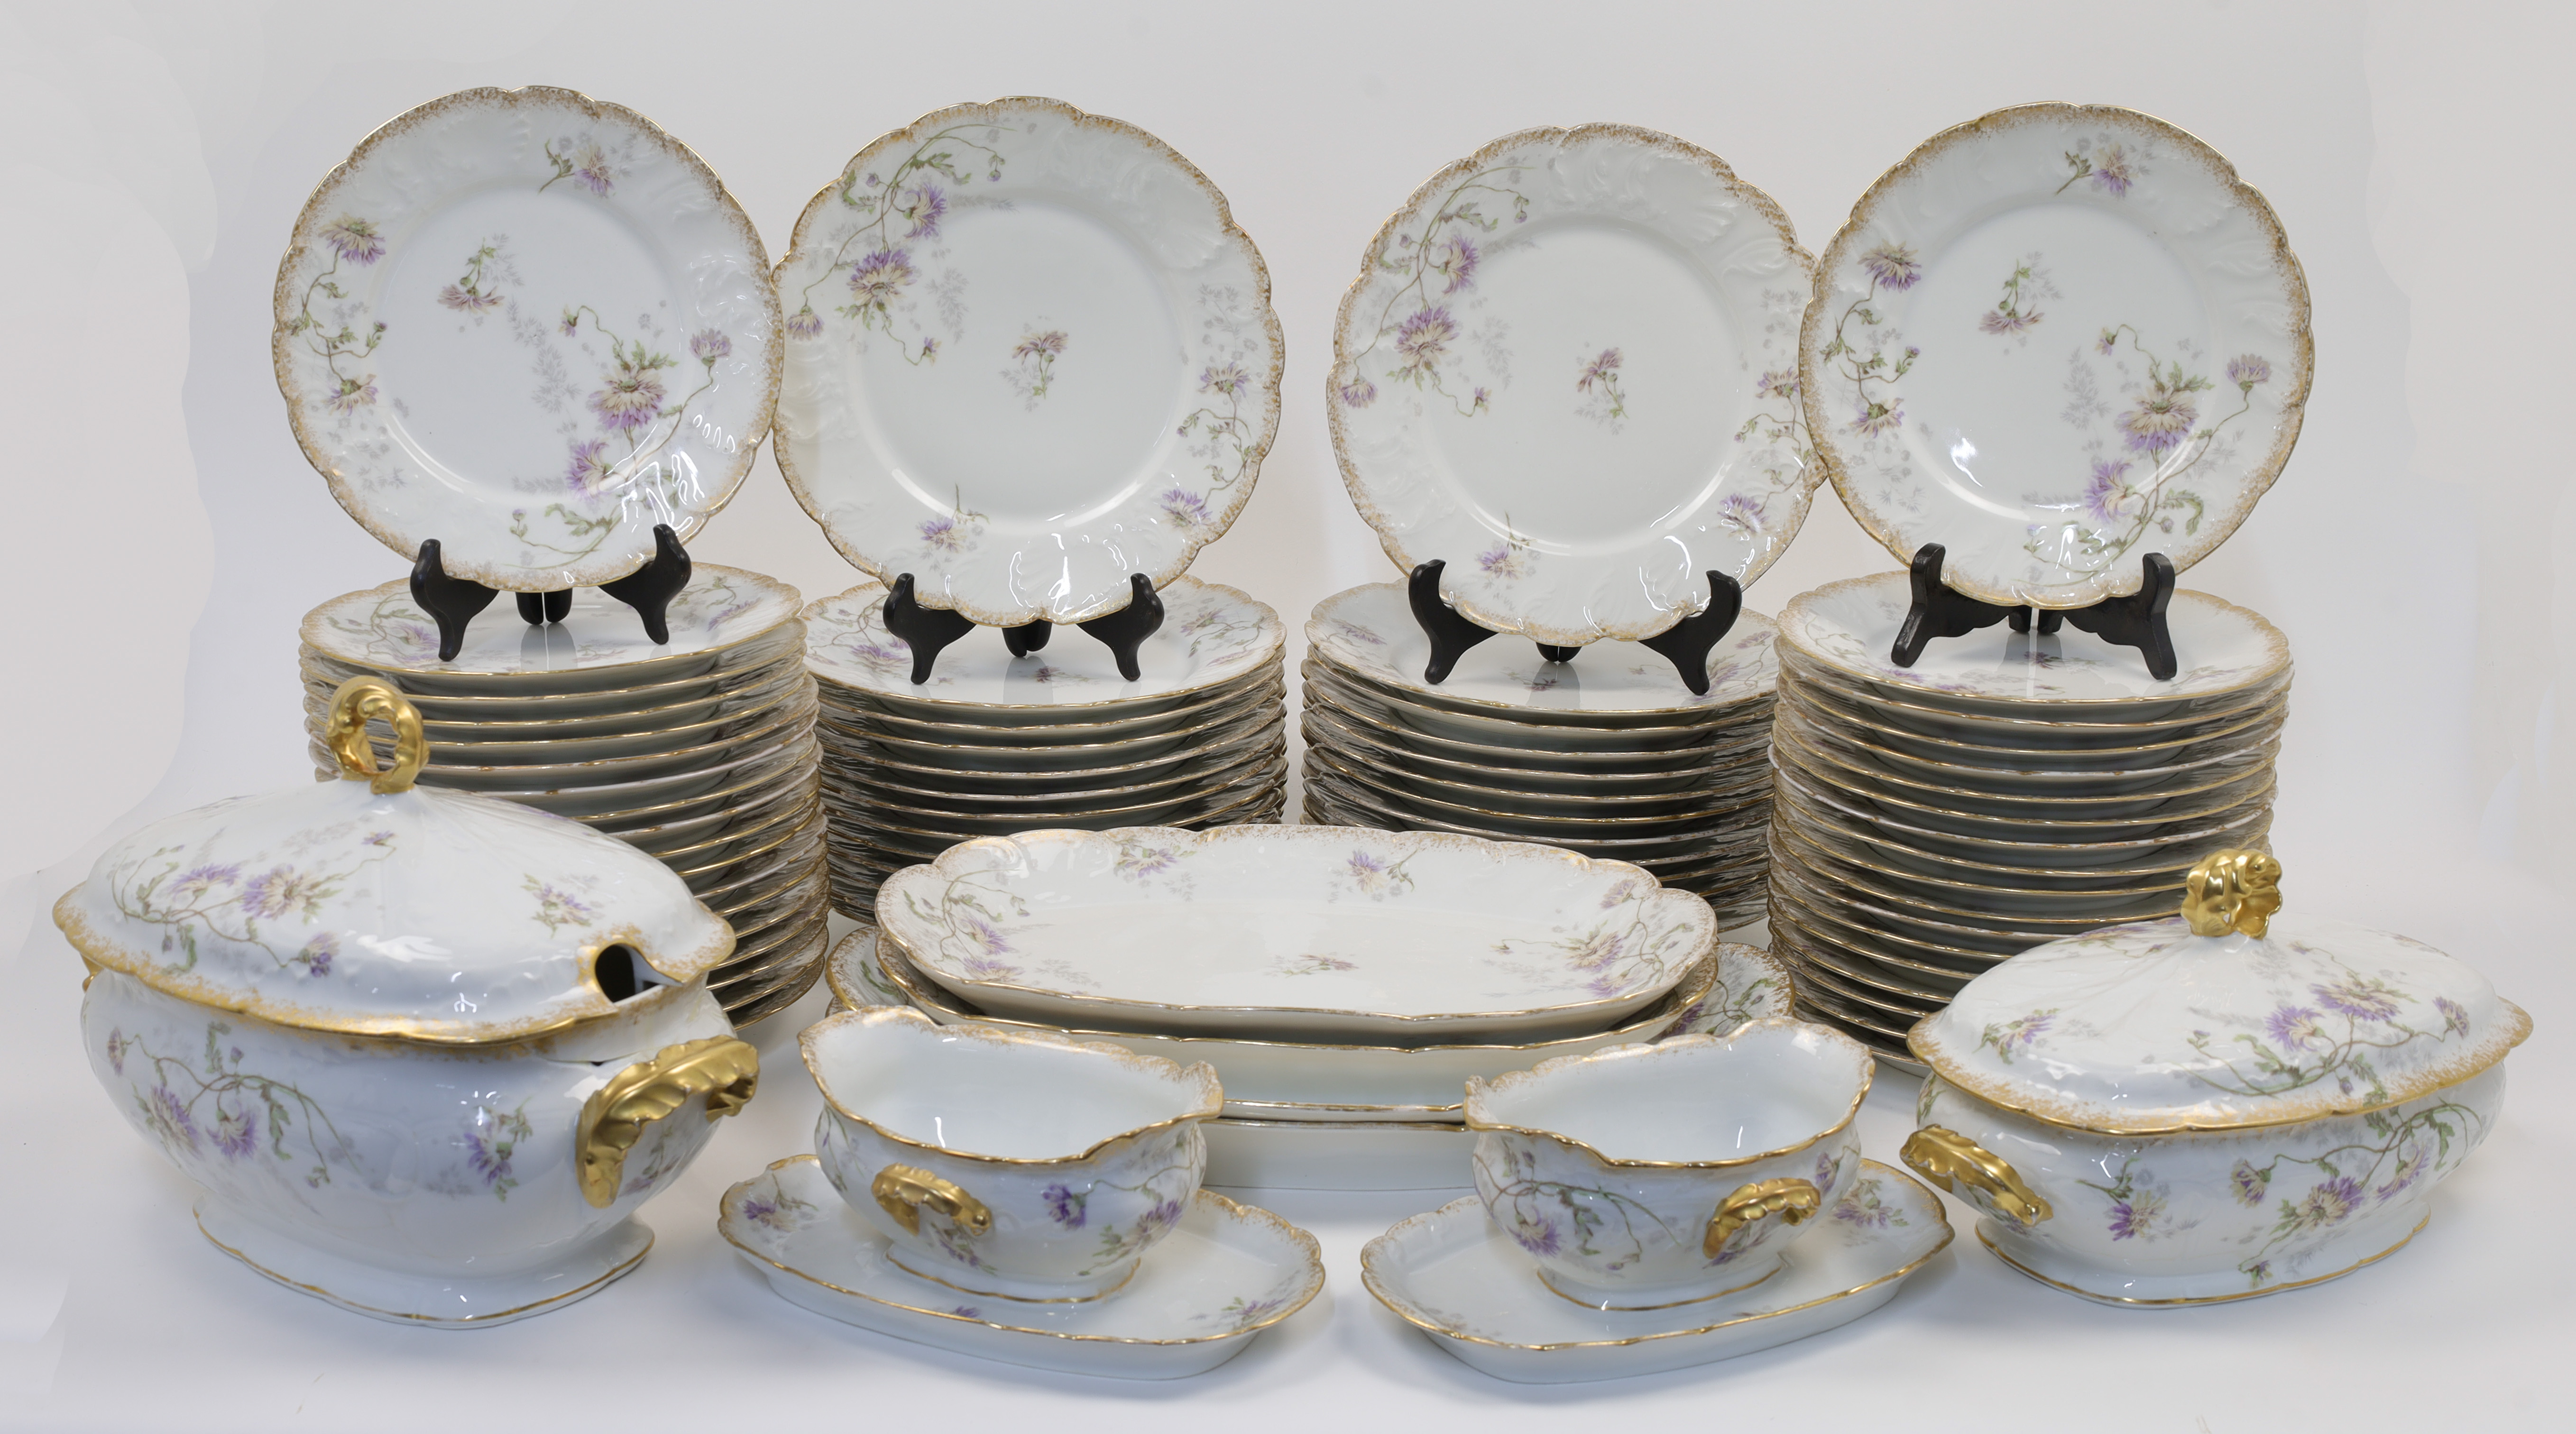 An extensive French porcelain dinner service, probably Limoges, late 19th / early 20th century, r...